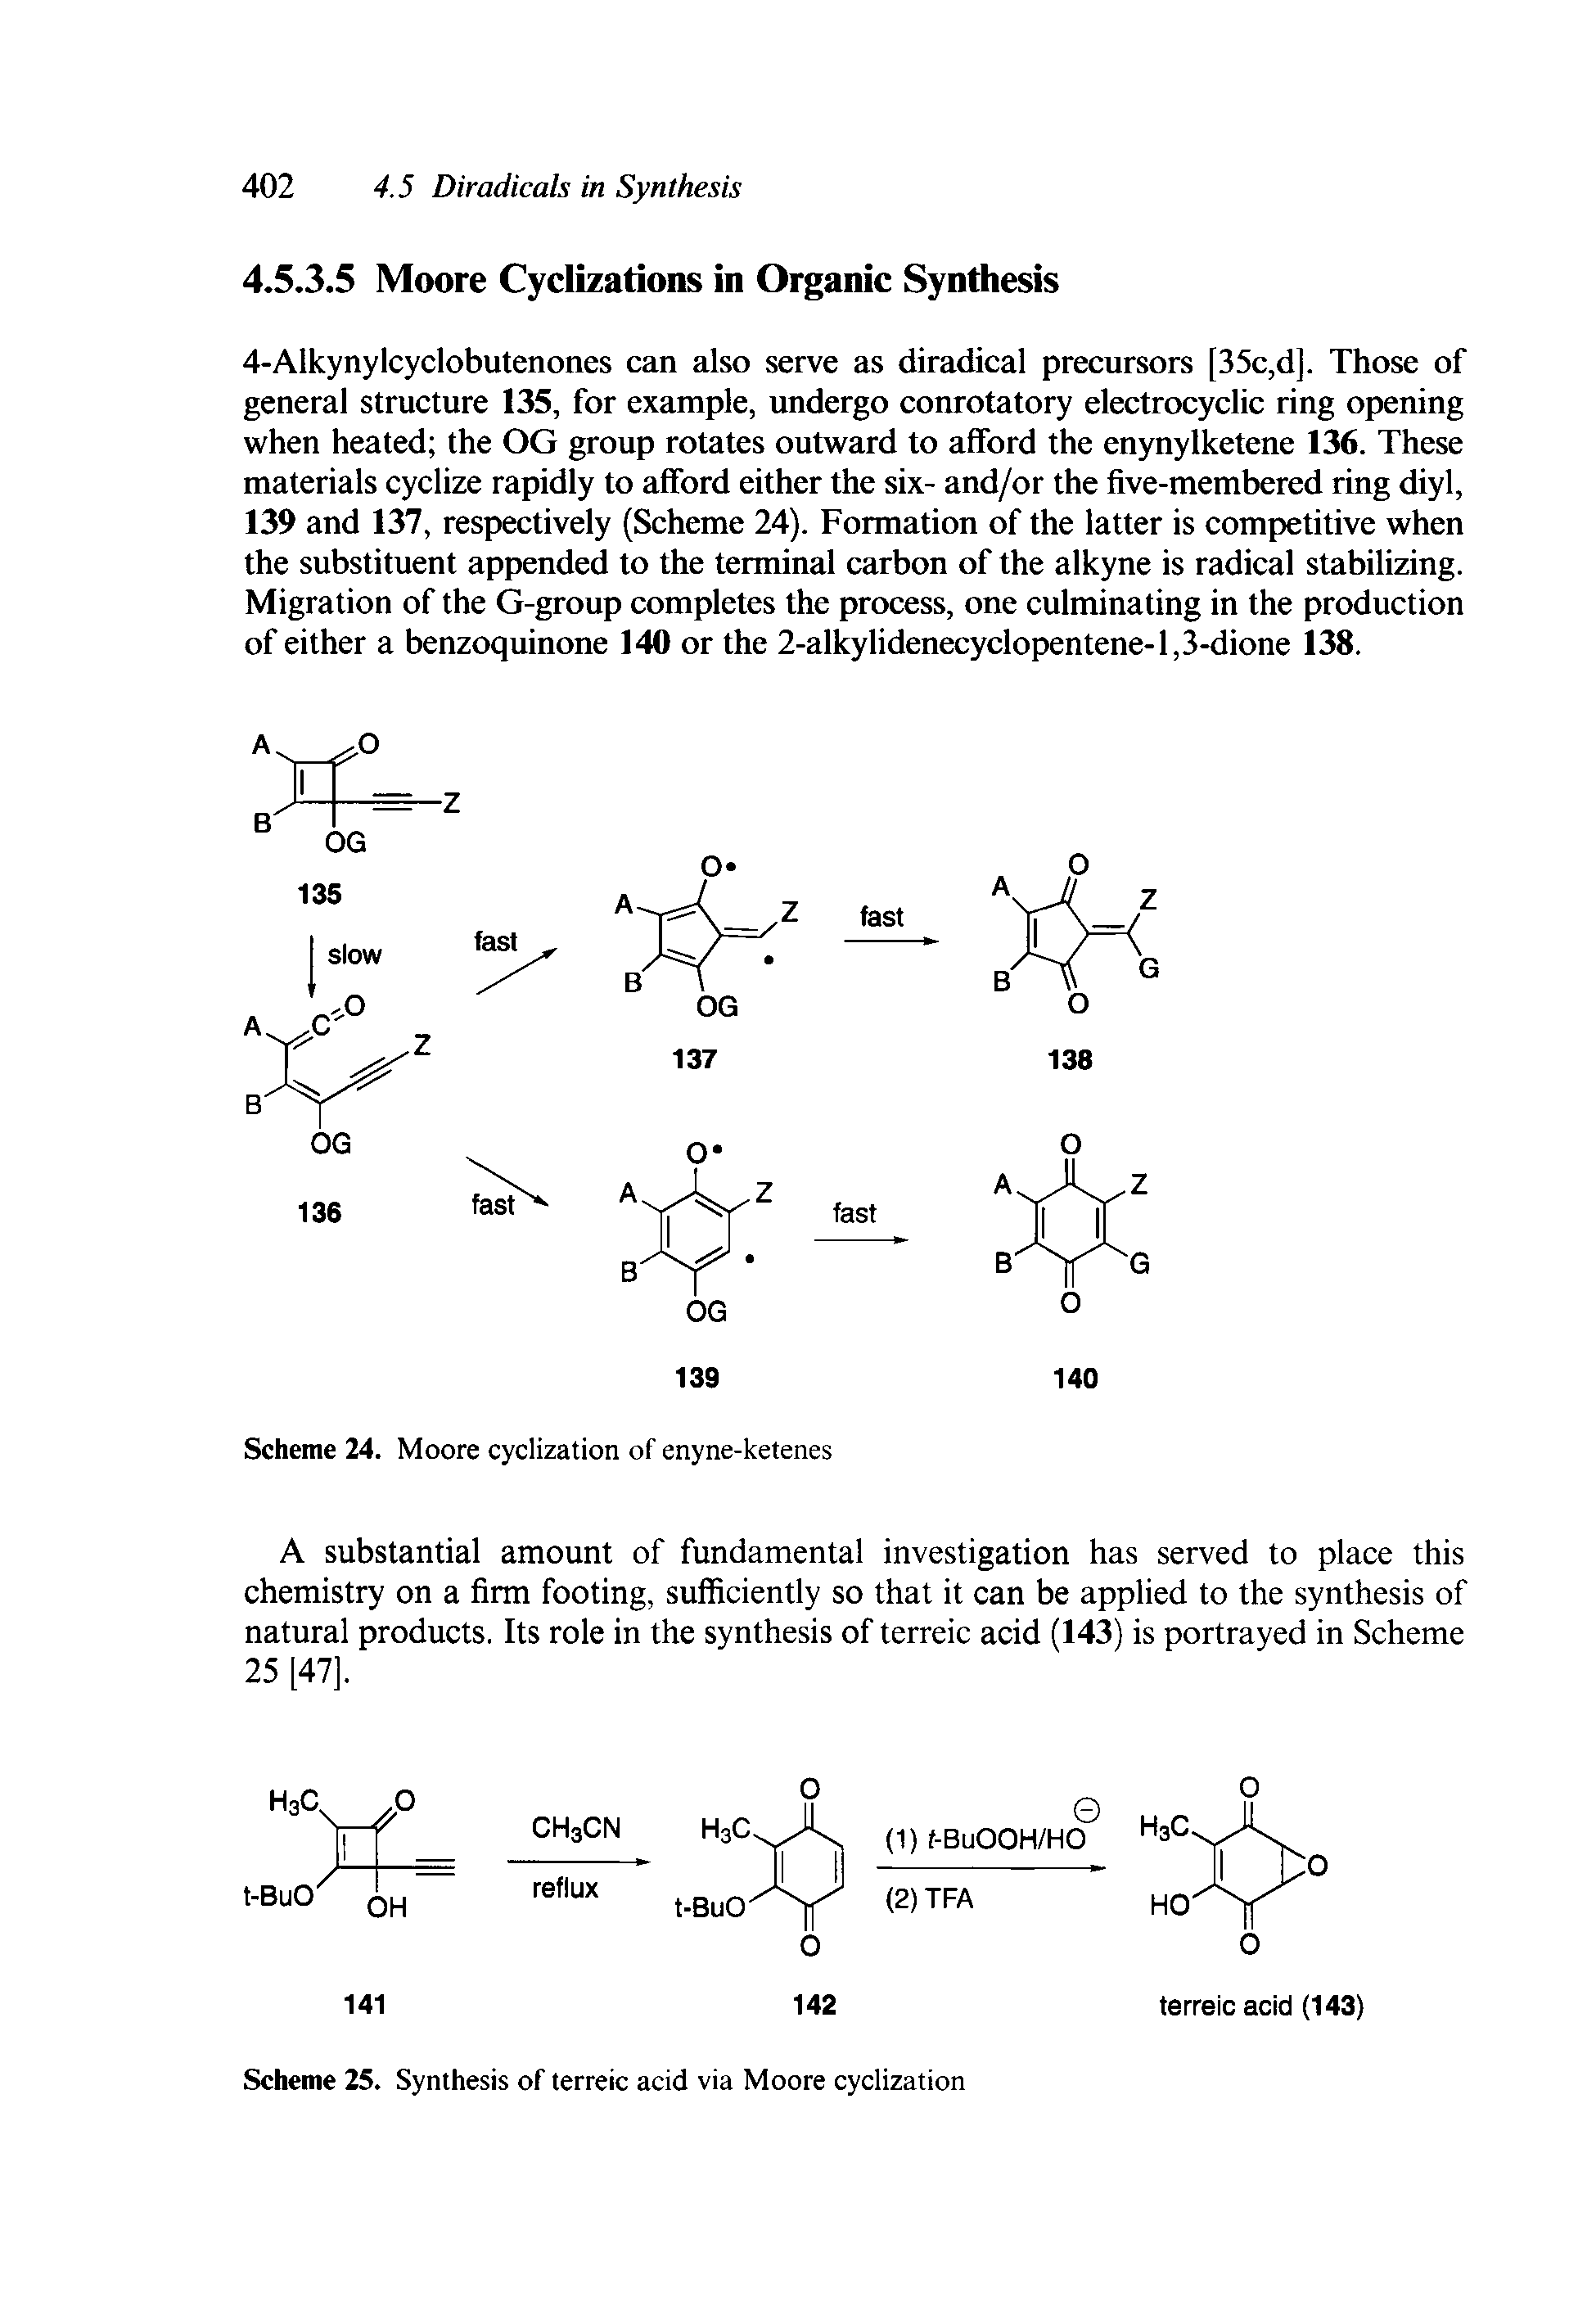 Scheme 25. Synthesis of terreic acid via Moore cyclization...